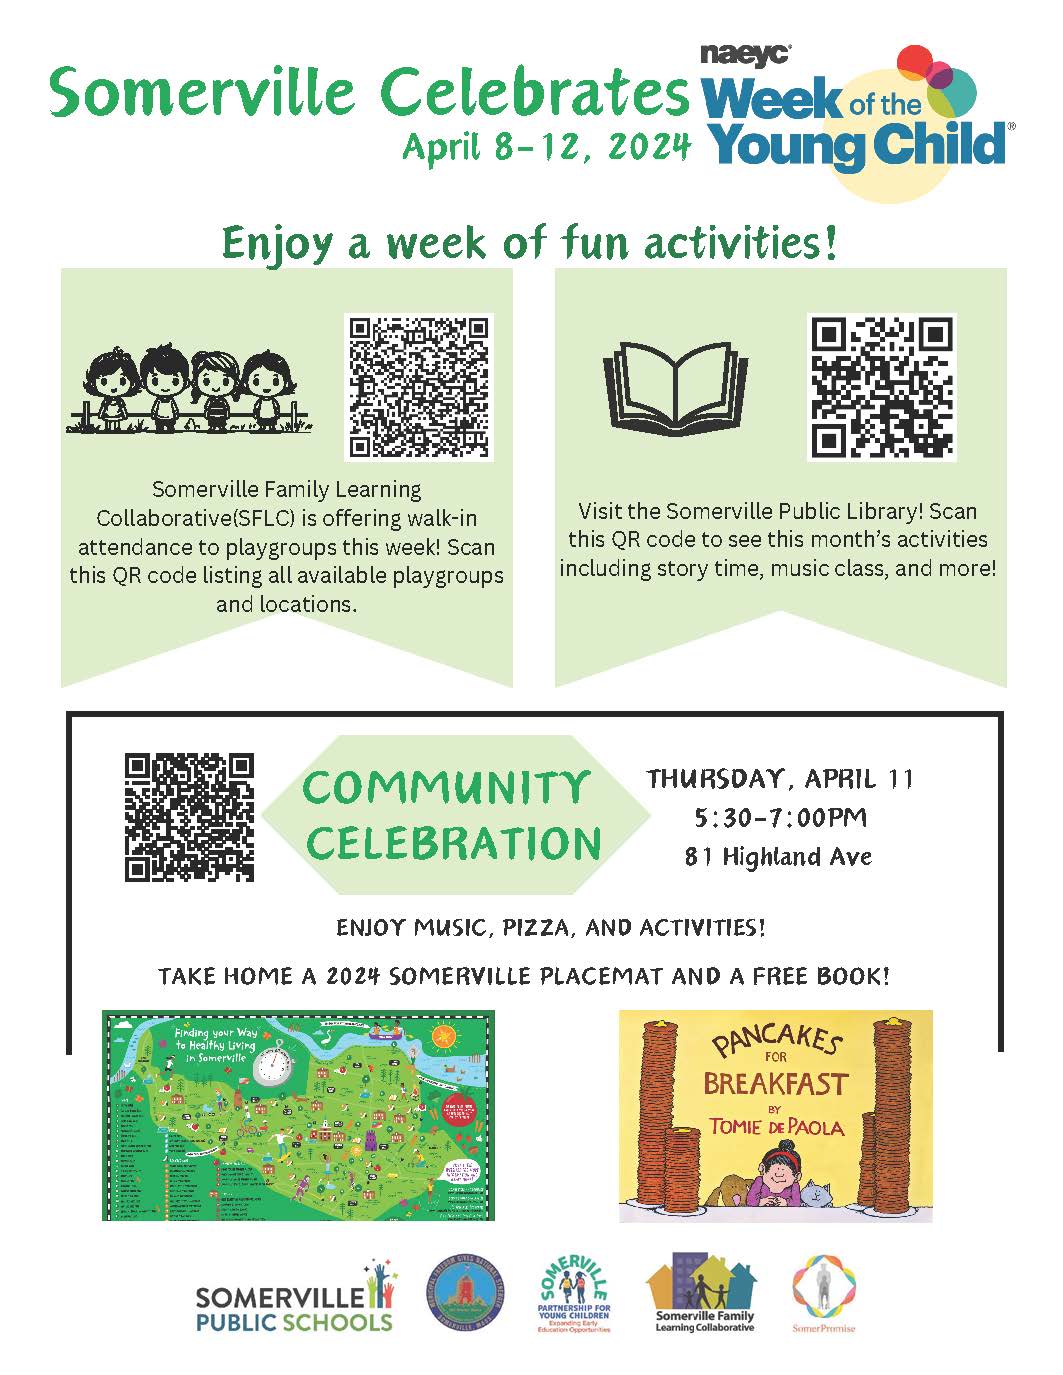 Somerville Celebrates COMMUNITY CELEBRATION THURSDAY, APRIL 11 5:30-7:00PM 81 Highland Ave Somerville Family Learning Collaborative(SFLC) is offering walk-in attendance to playgroups this week! Scan this QR code listing all available playgroups and locati